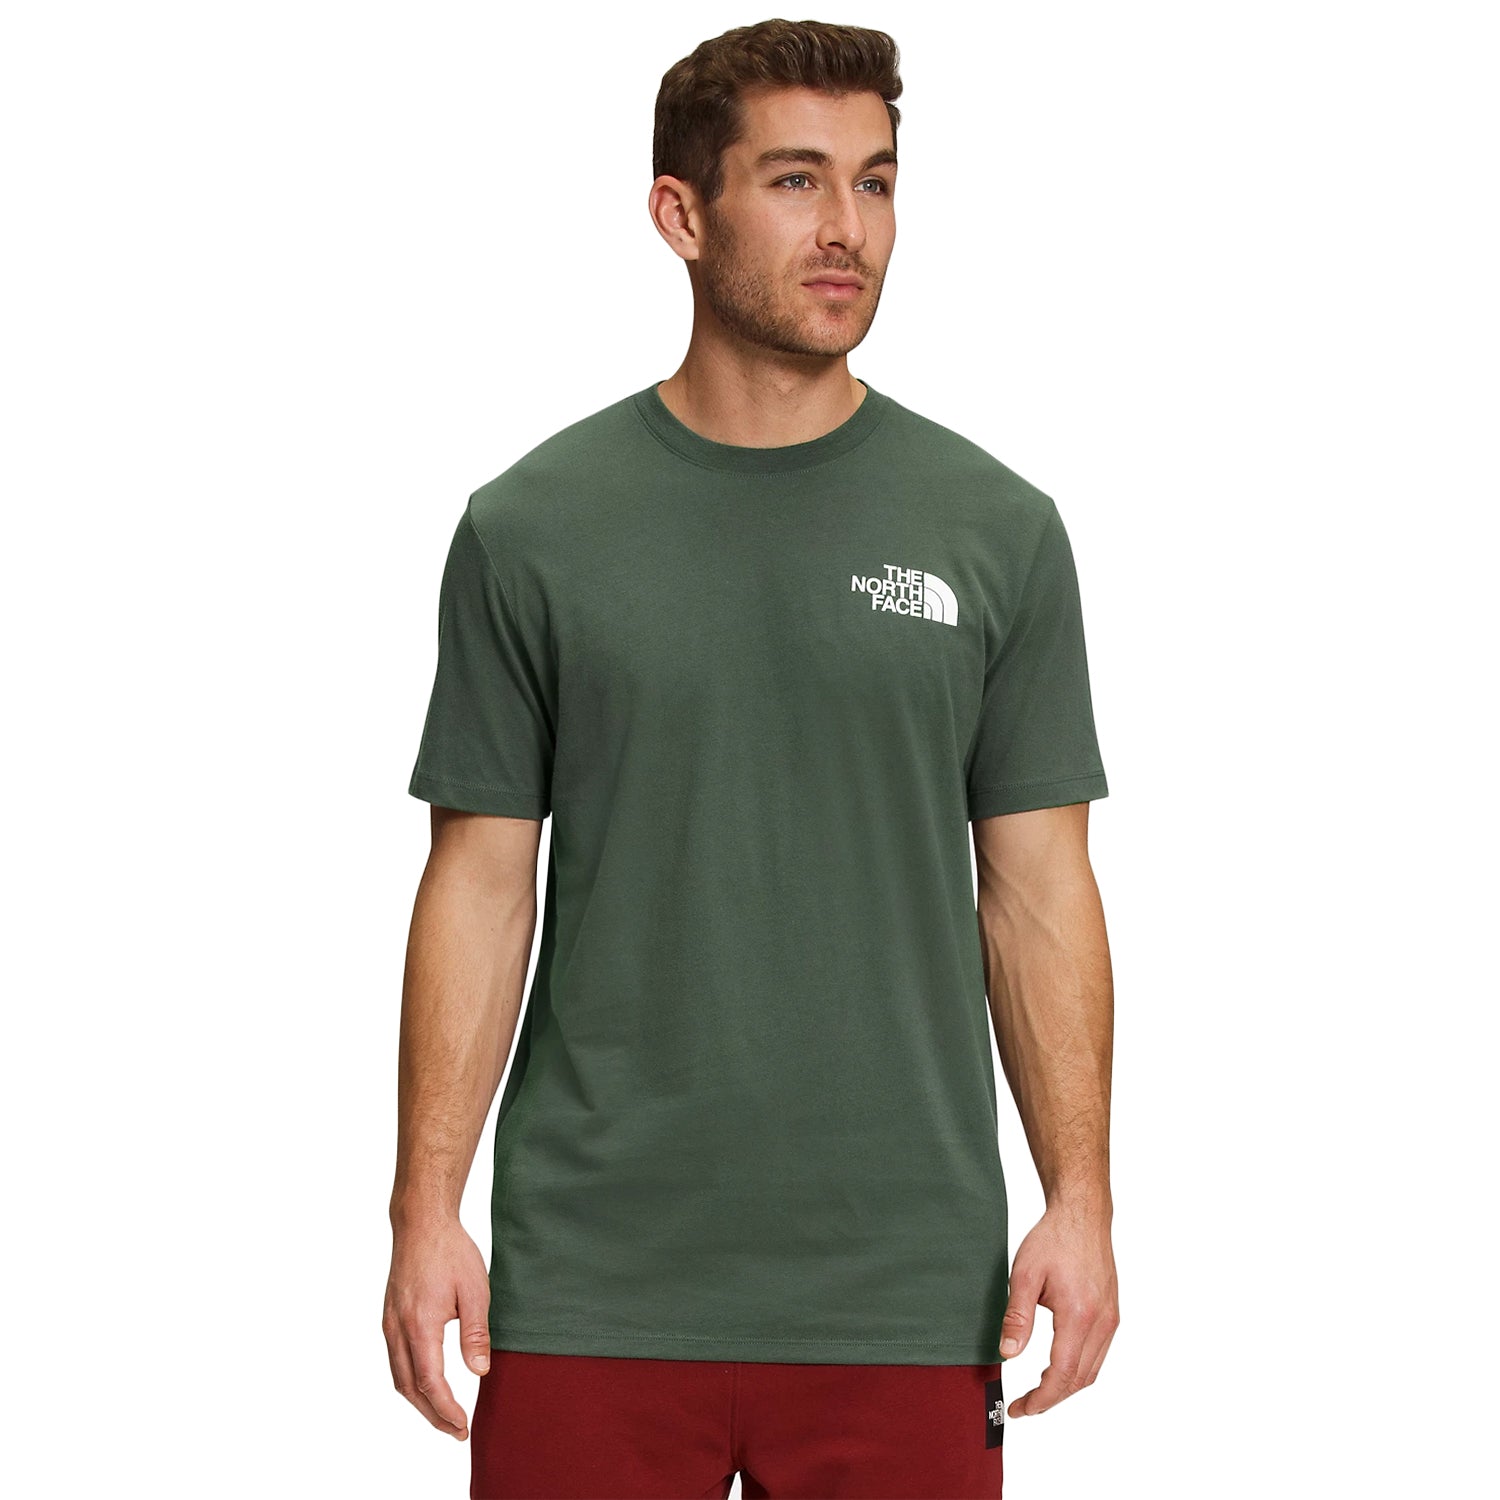 The North Face Men S Short-Sleeve Box NSE Tee (M)